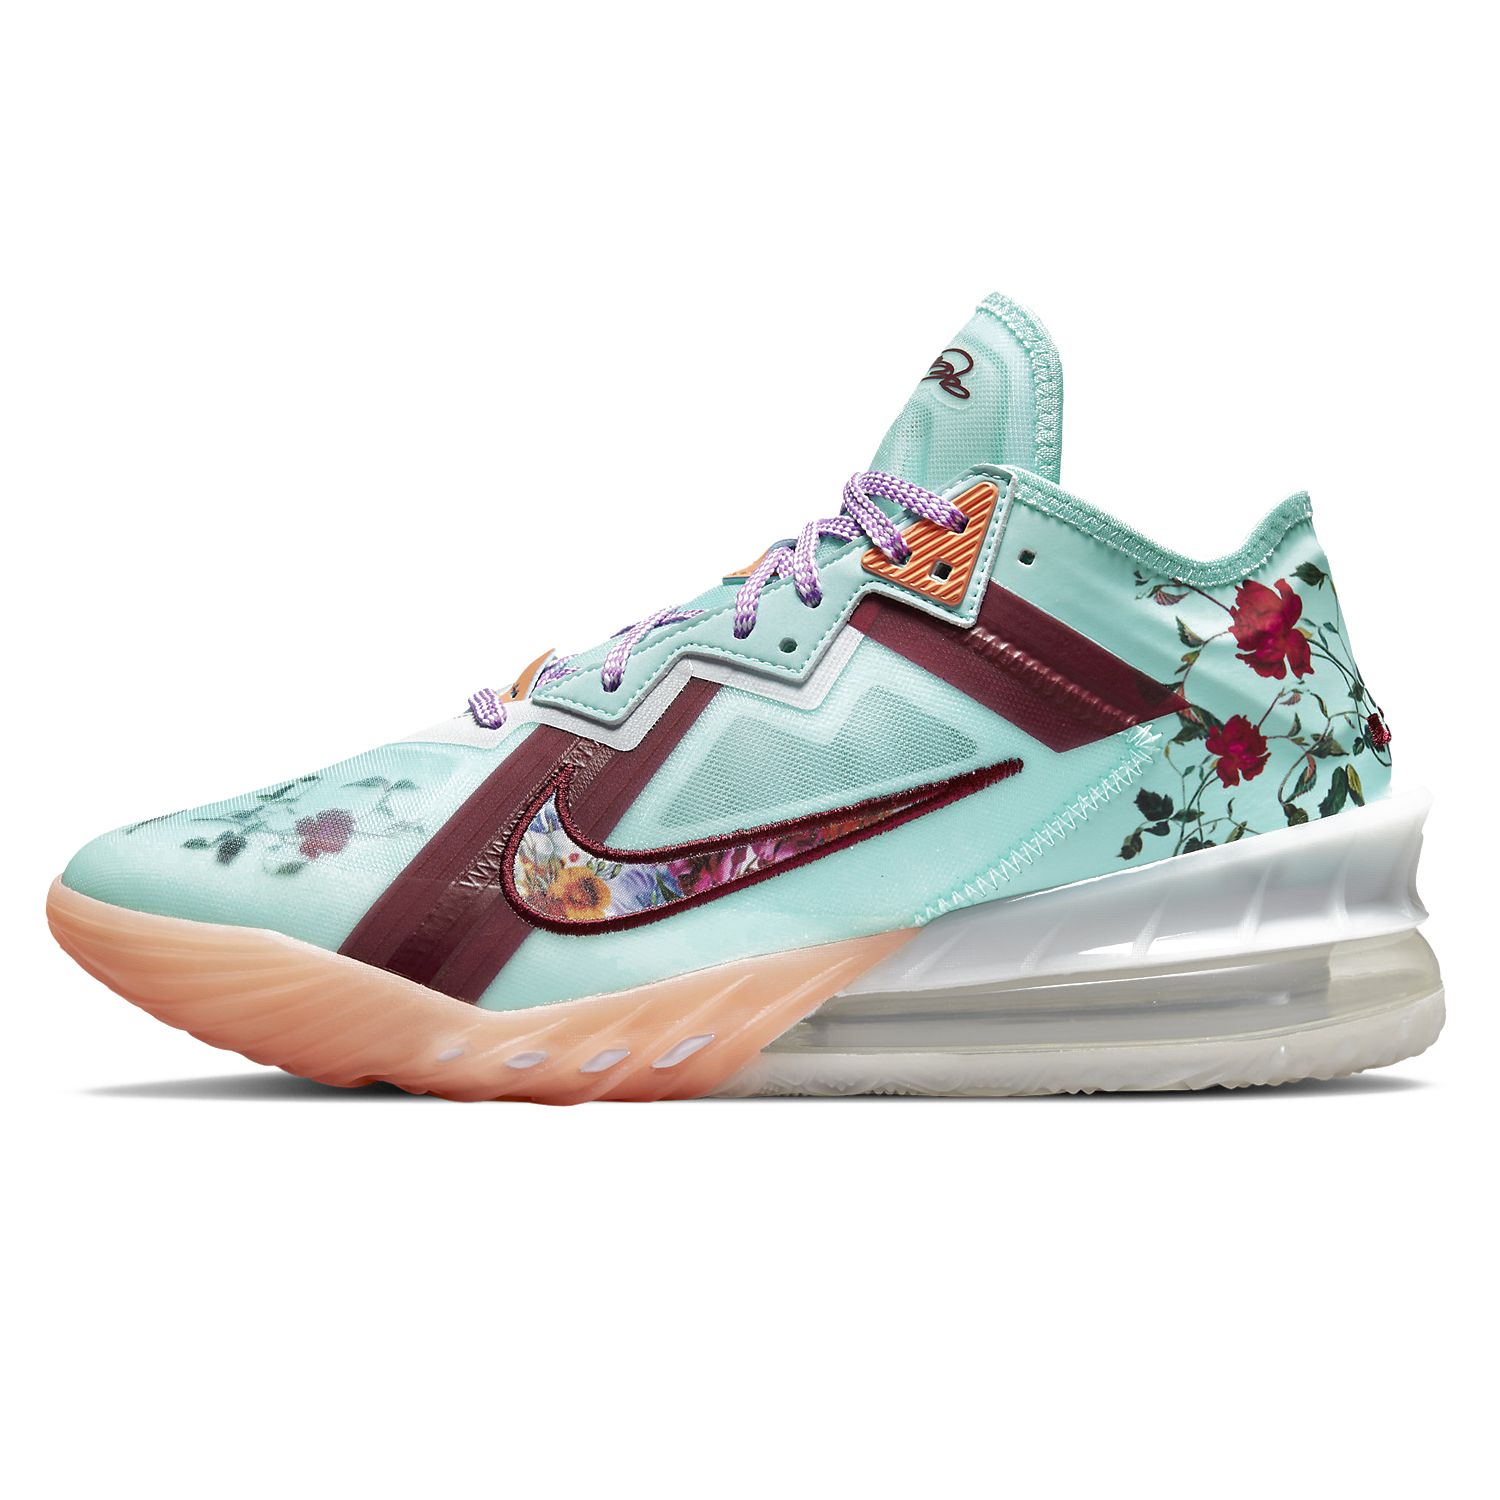 Nike LeBron 18 Low "Floral" Basketball Shoes CV7562-400 COPA/TEAM RED-HYPER PINK-WHITE